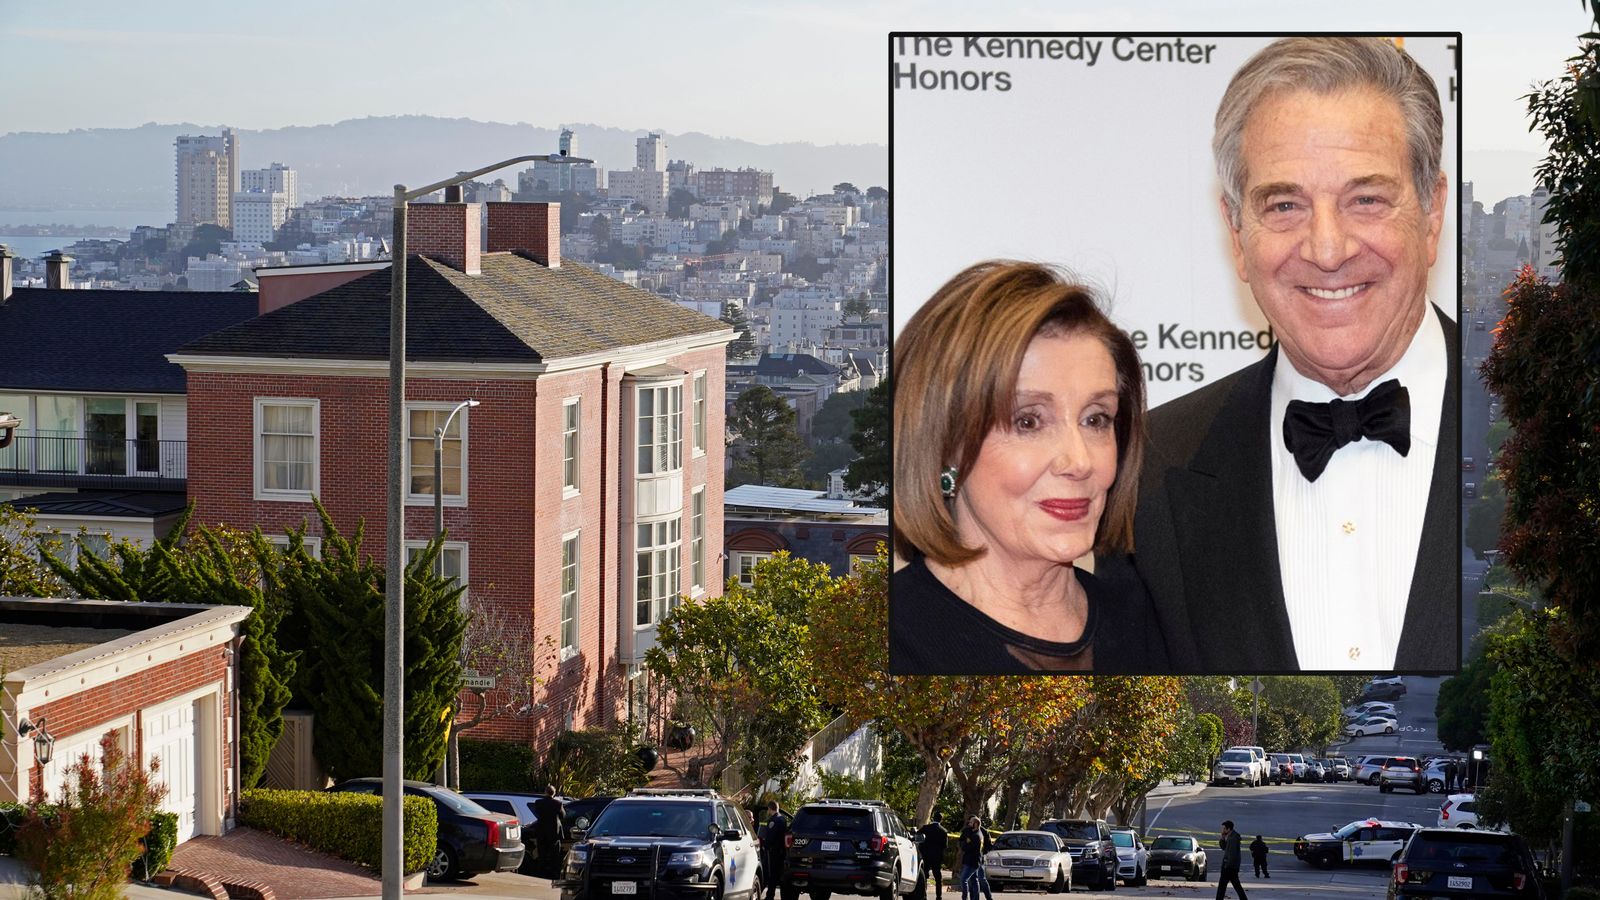 Joe Biden condemns 'despicable' attack on Nancy Pelosi's husband - as police say assault was 'intentional'